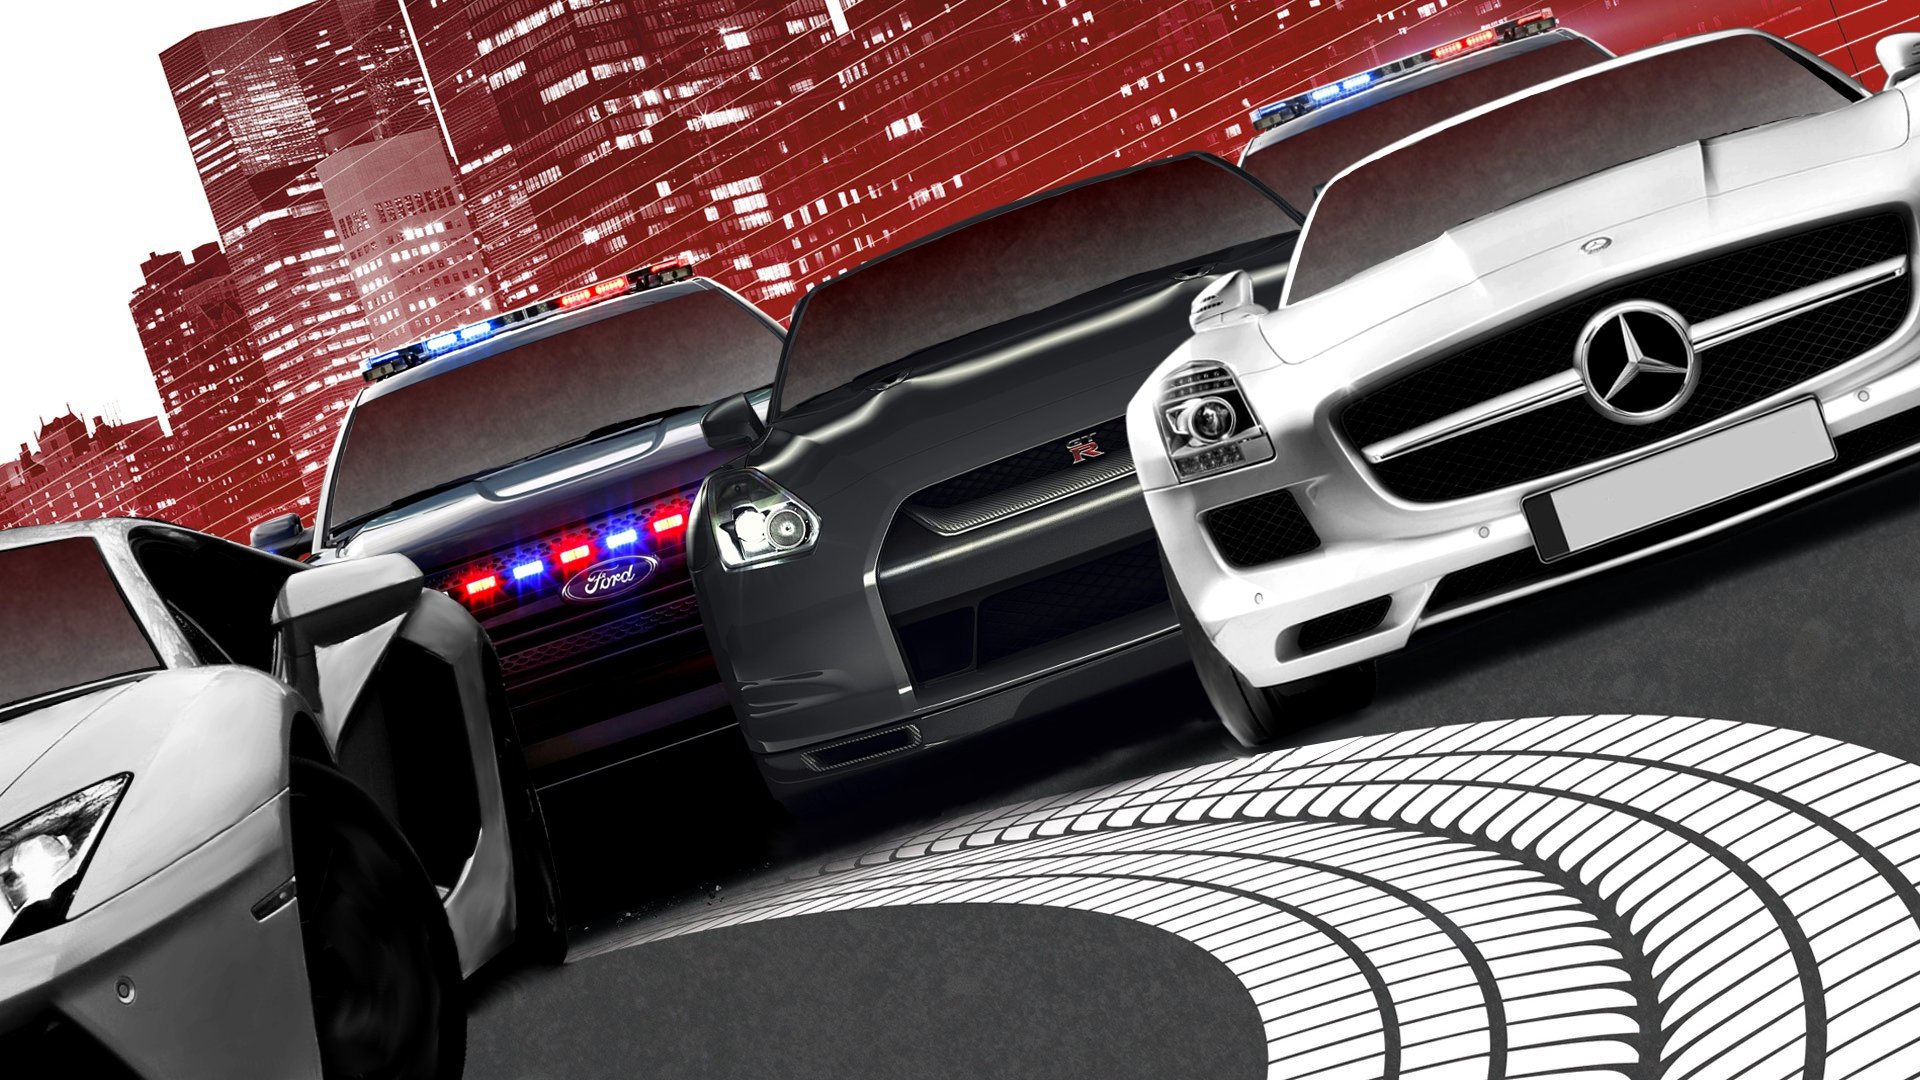 Download hd 1920x1080 Need For Speed: Most Wanted computer wallpaper ID:137056 for free